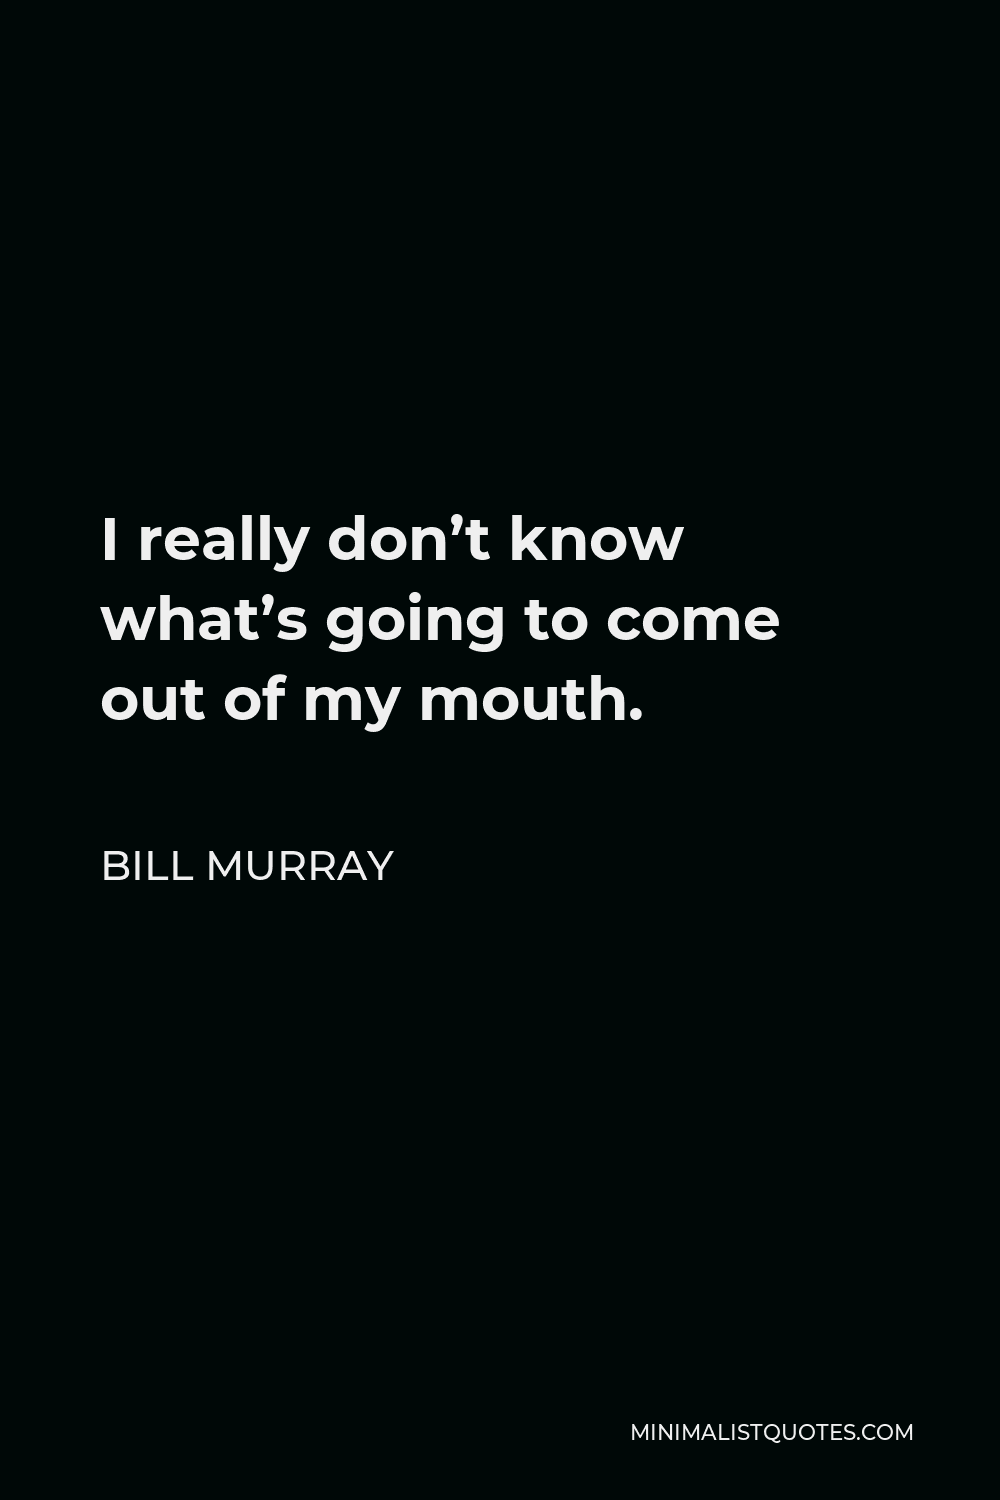 Bill Murray Quote - I really don’t know what’s going to come out of my mouth.